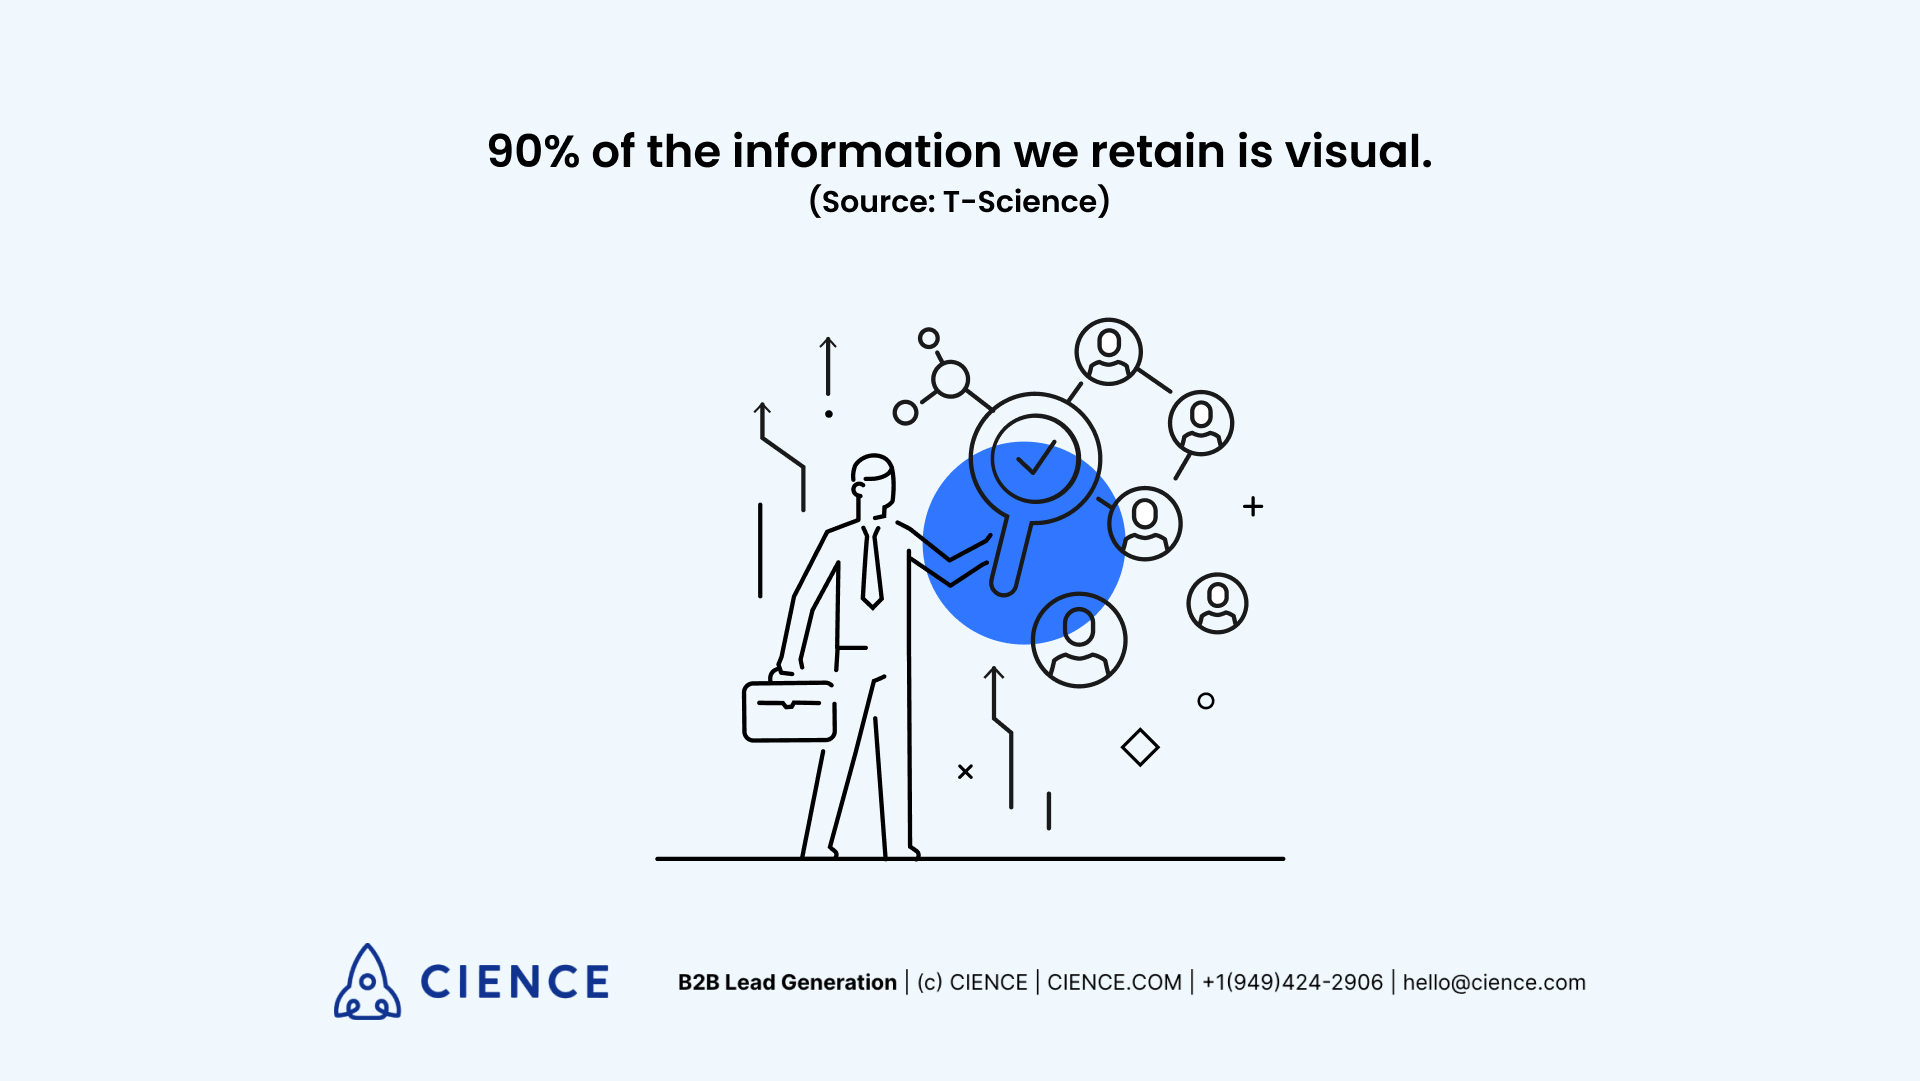 T-Science: 90% of the information we retain is visual